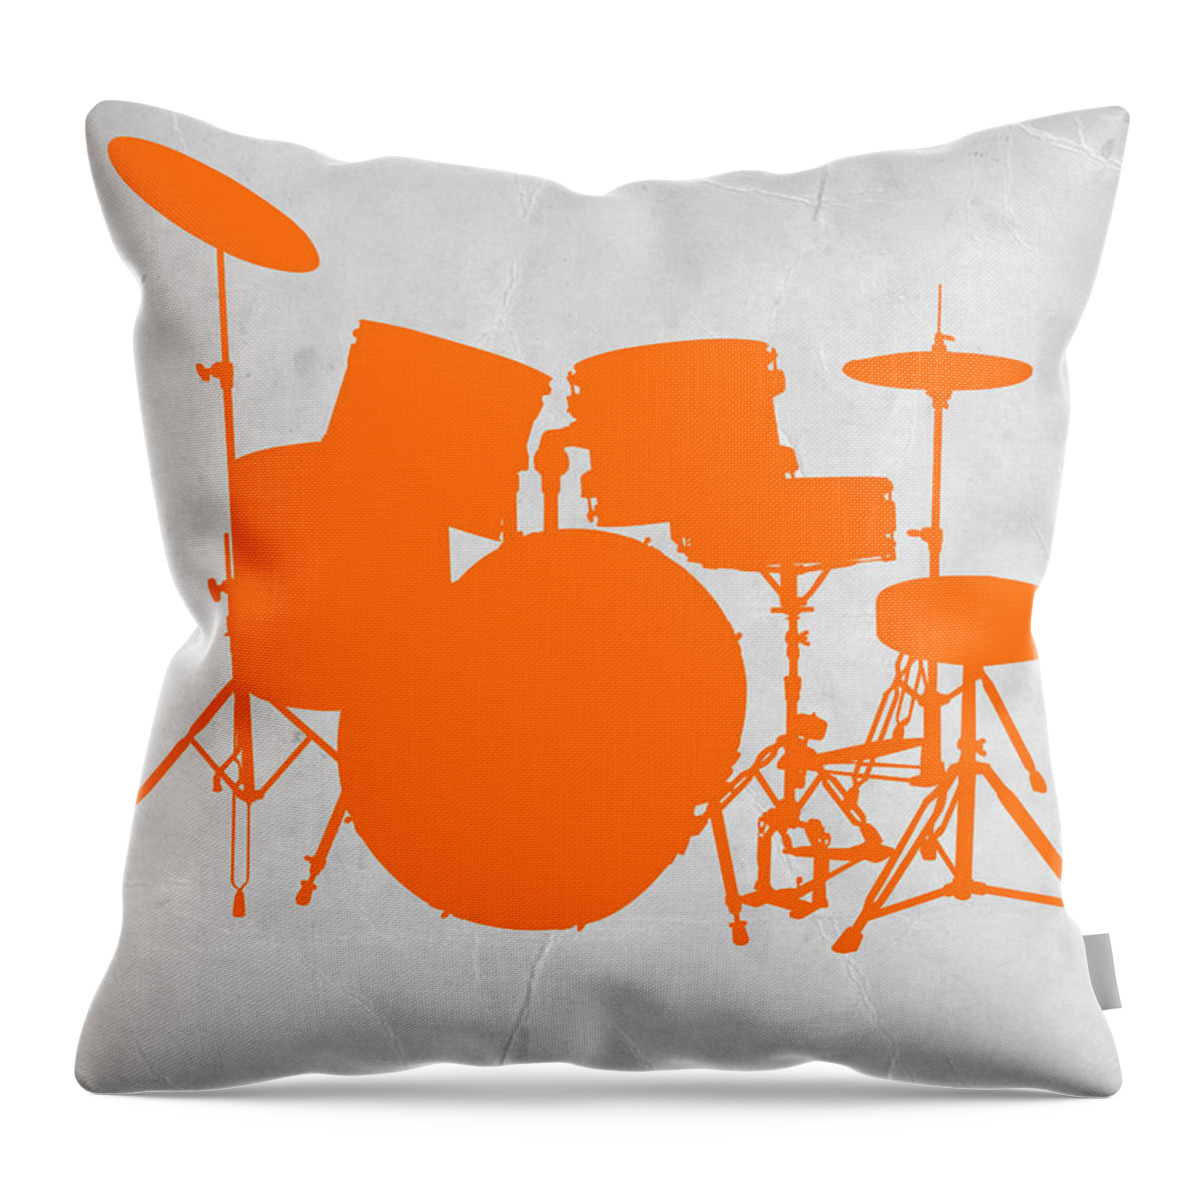 Drums Throw Pillow featuring the photograph Orange Drum Set by Naxart Studio